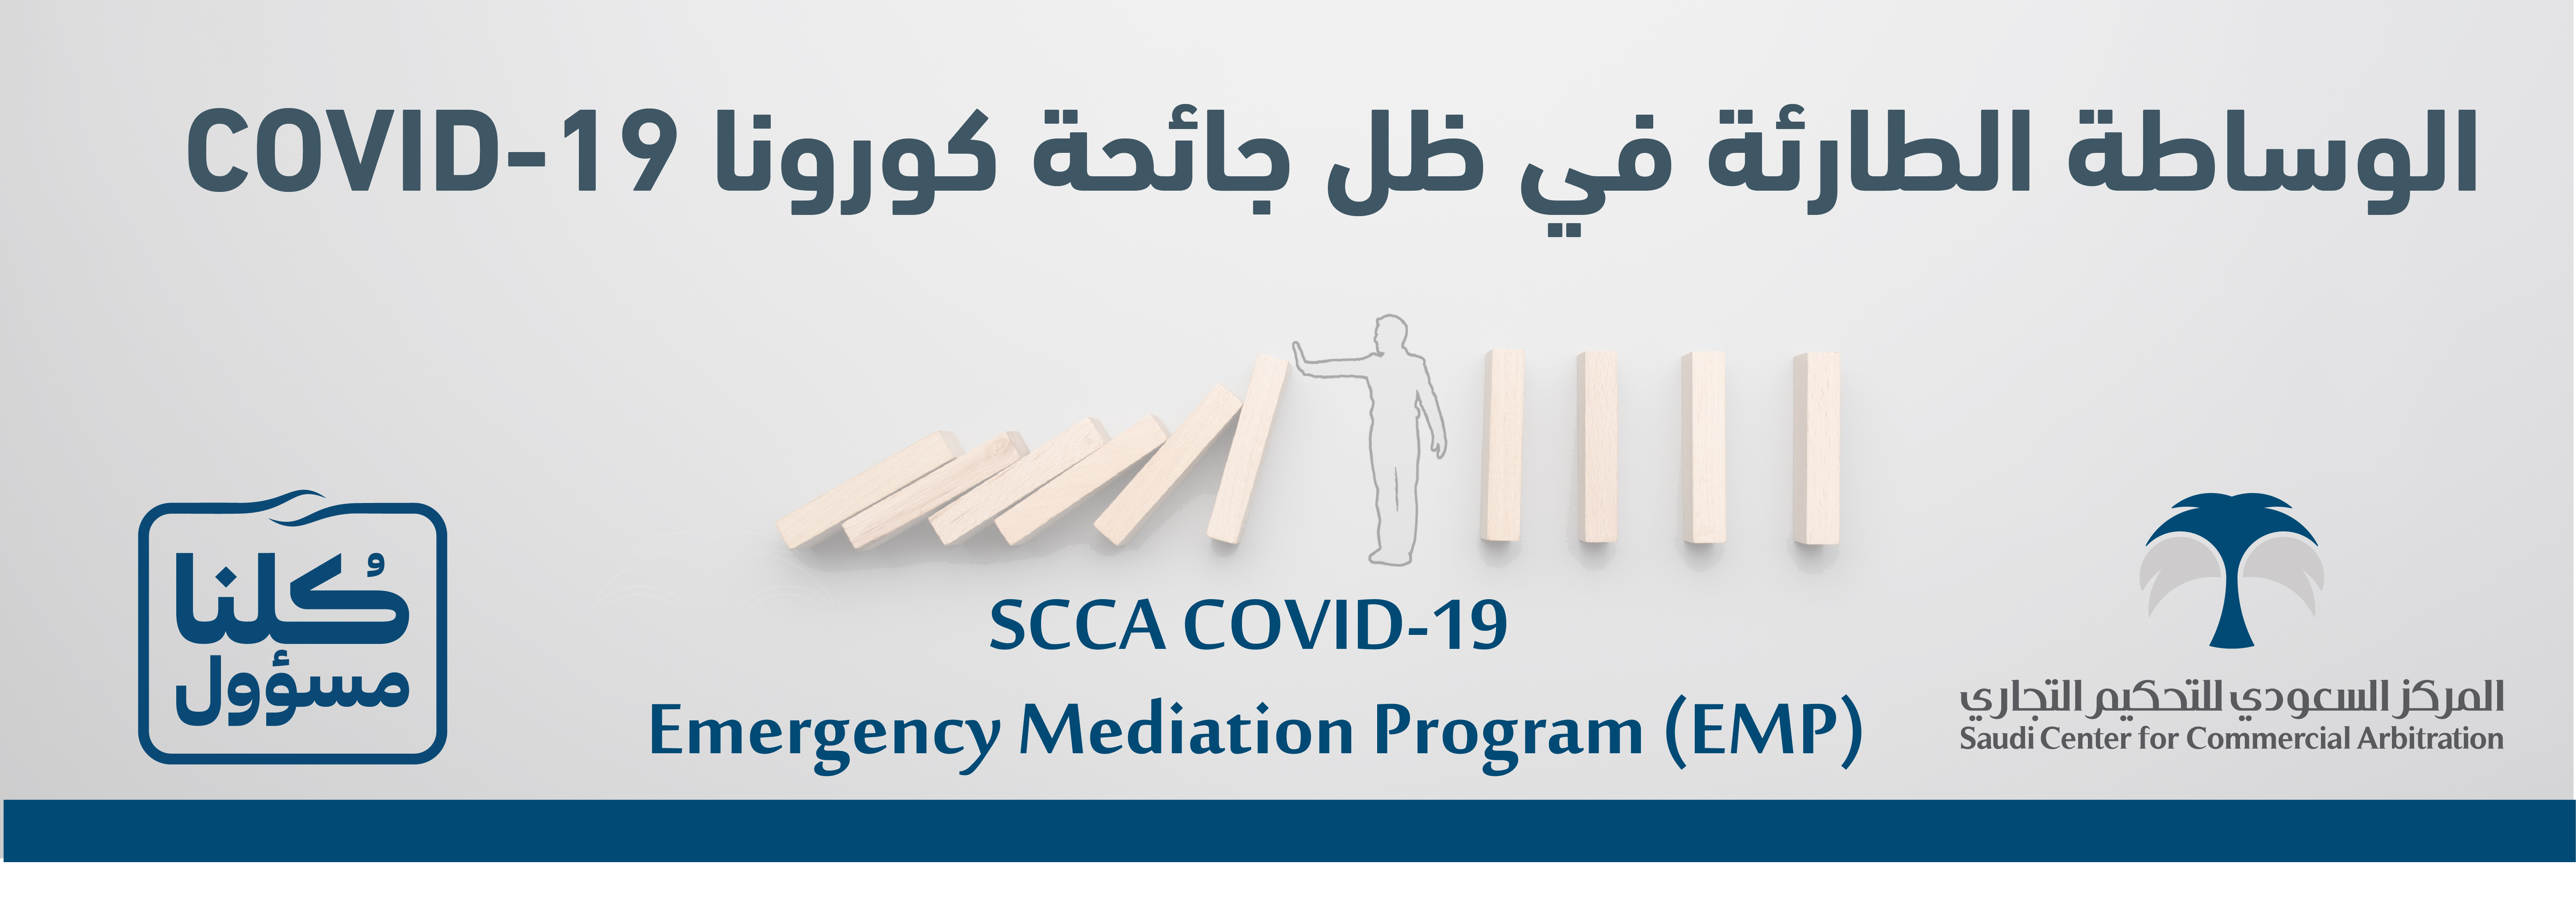 SCCA launches its “COVID-19 Emergency Mediation Program (EMP)” to help reduce the pandemic’s impact on the business sector